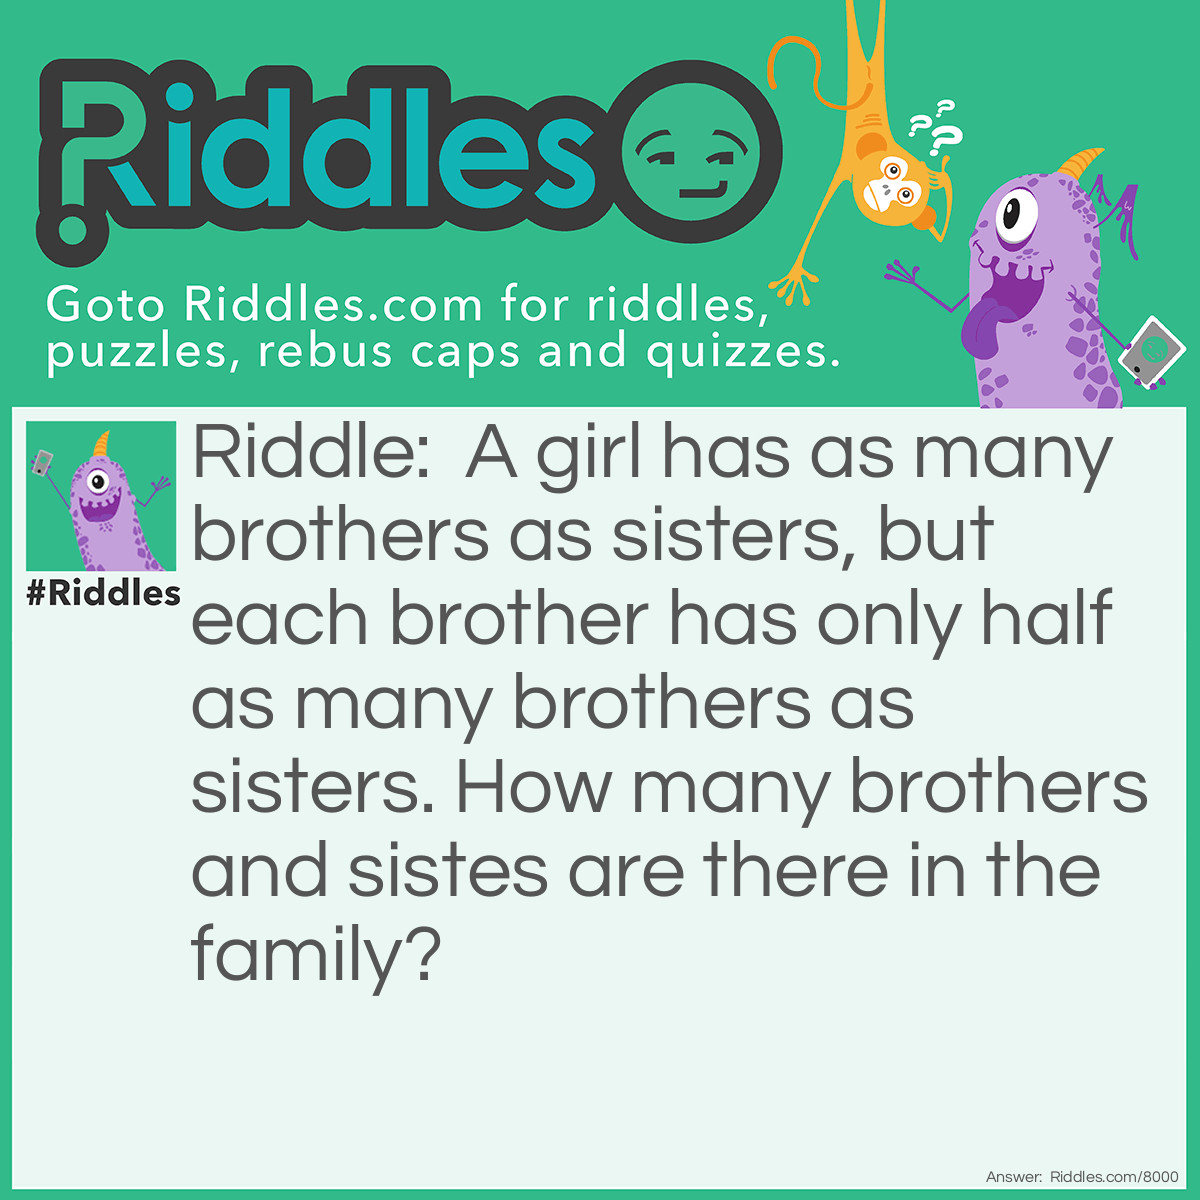 Riddle: A girl has as many brothers as sisters, but each brother has only half as many brothers as sisters. How many brothers and sistes are there in the family? Answer: Four sisters and three brothers.